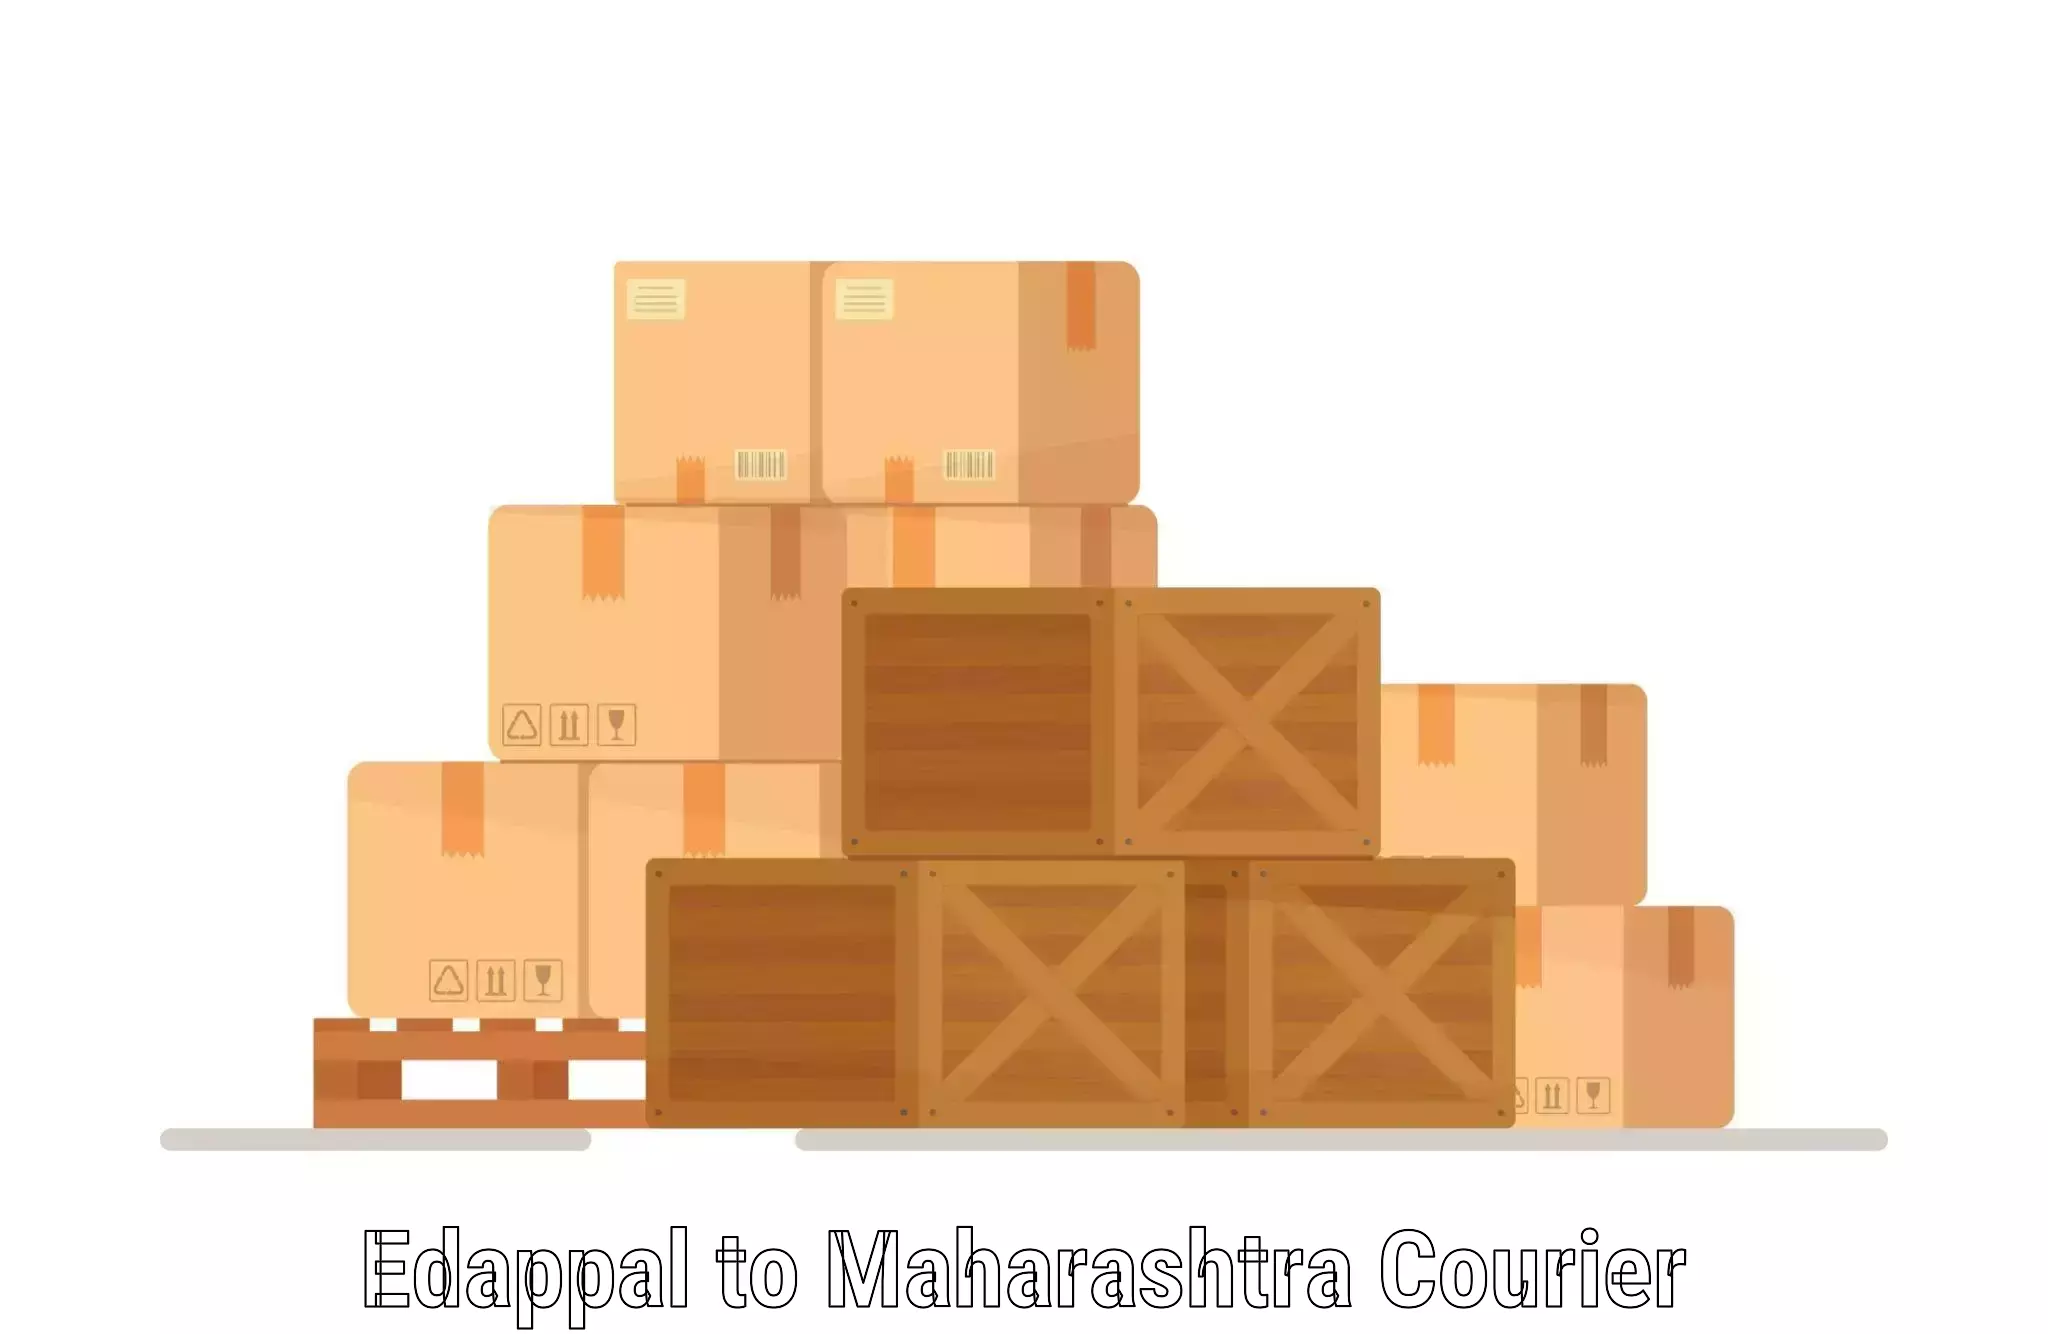 State-of-the-art courier technology Edappal to Barshi